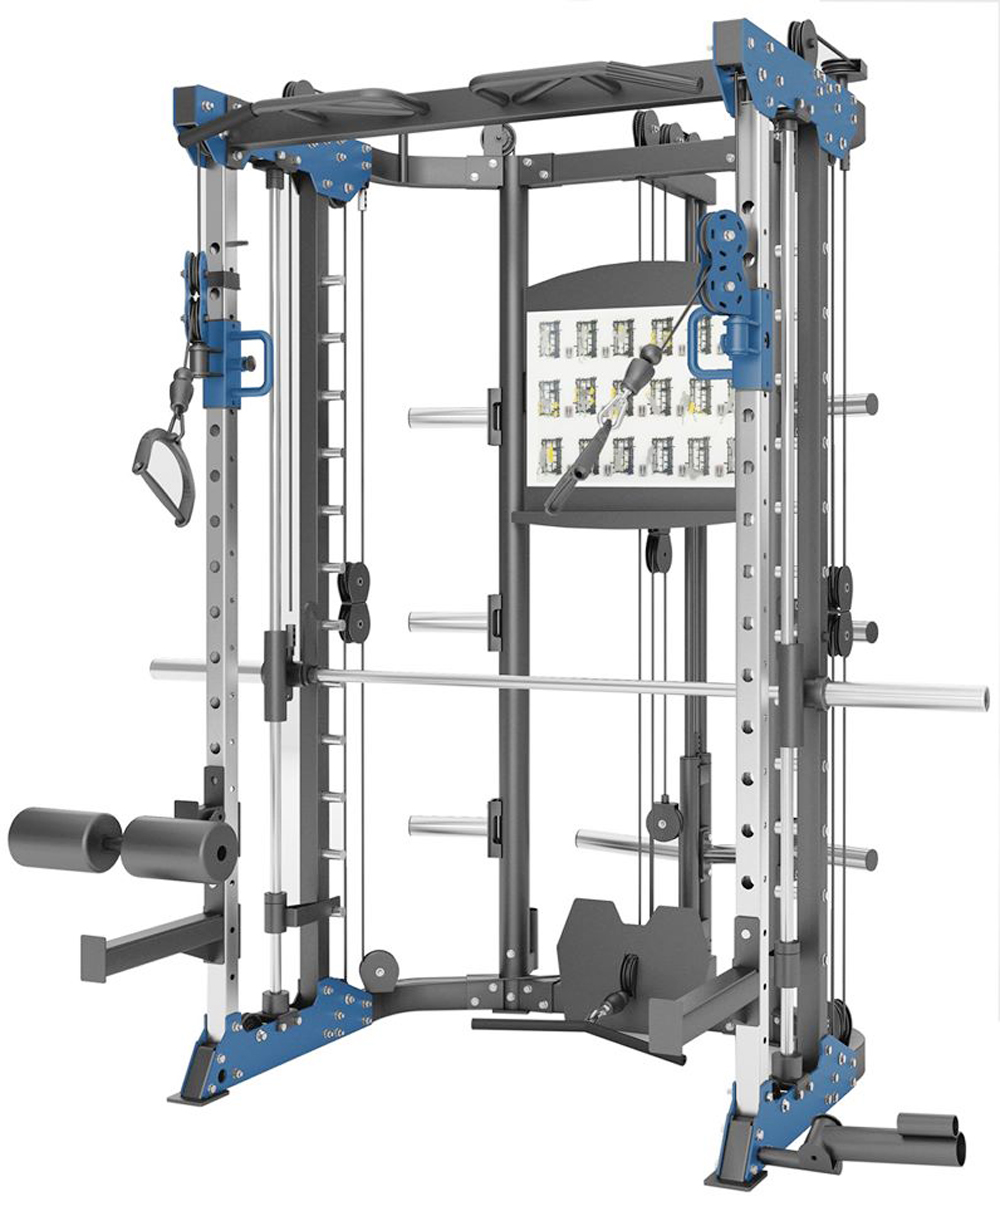 Commercial Multi-Functional Gym Equipment Smith Gym Fitness Machine